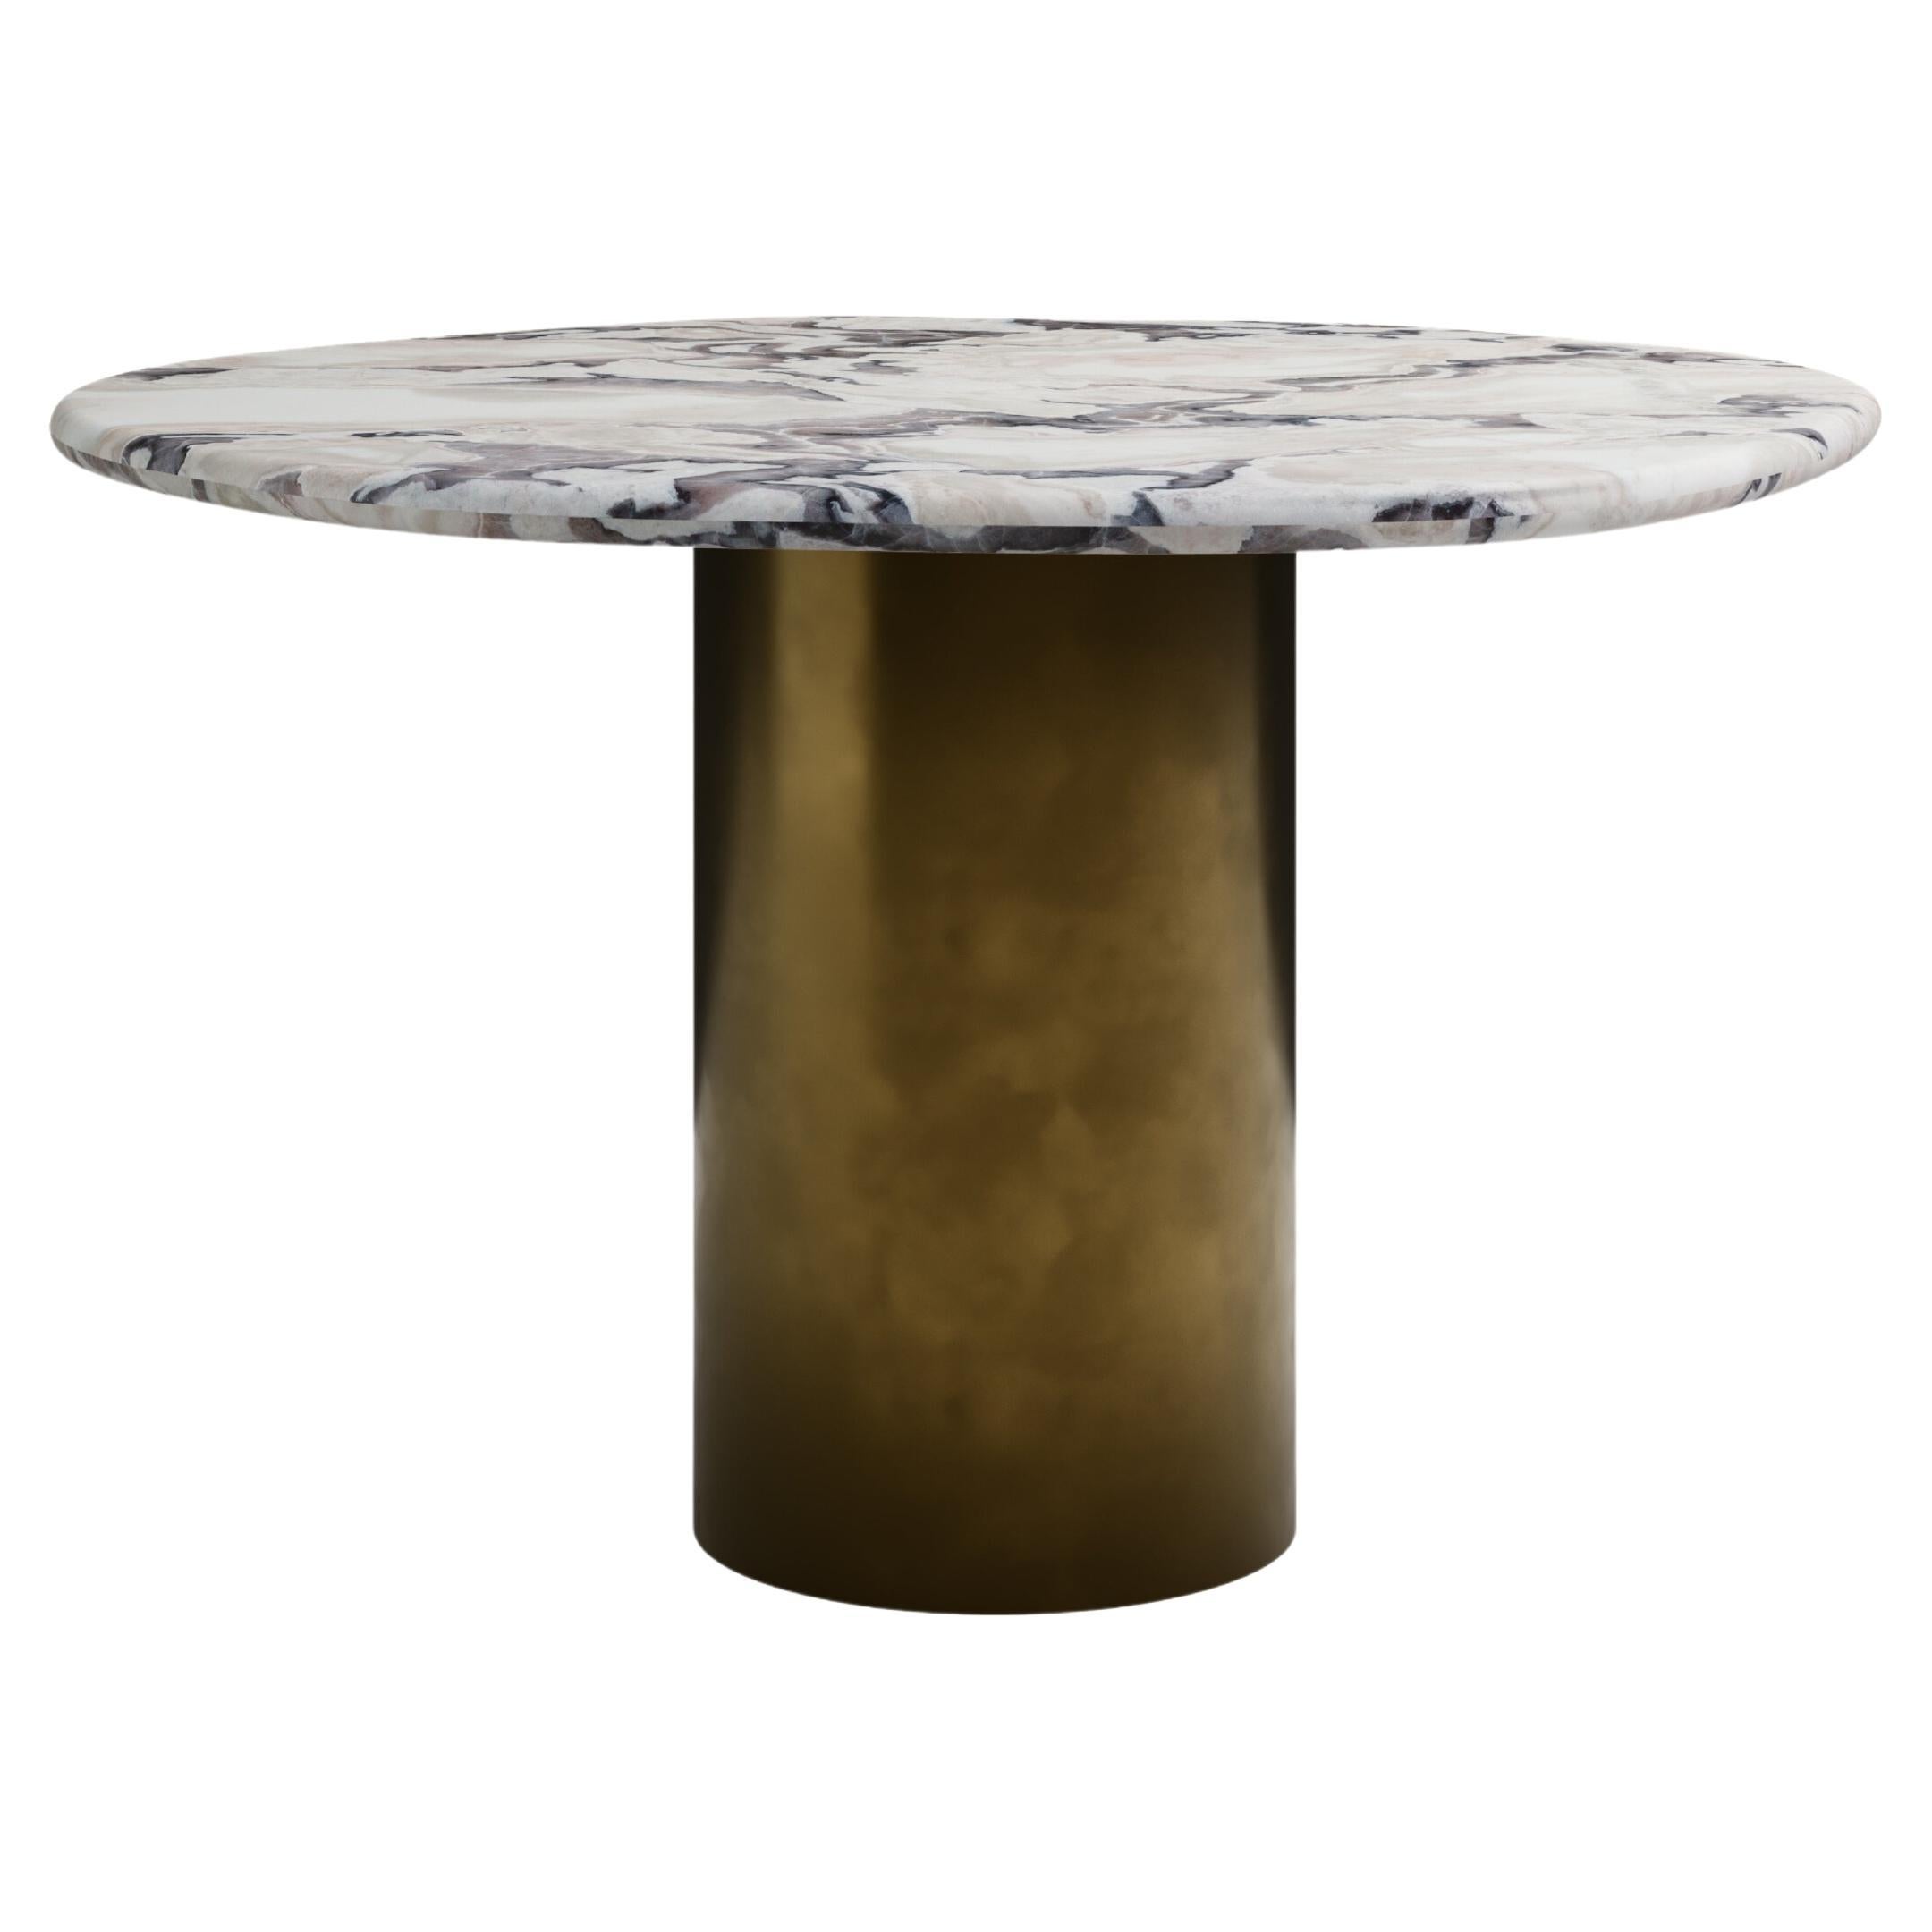 FORM(LA) Lago Round Dining Table 54”L x 54”W x 30”H Oyster Marble & Bronze For Sale